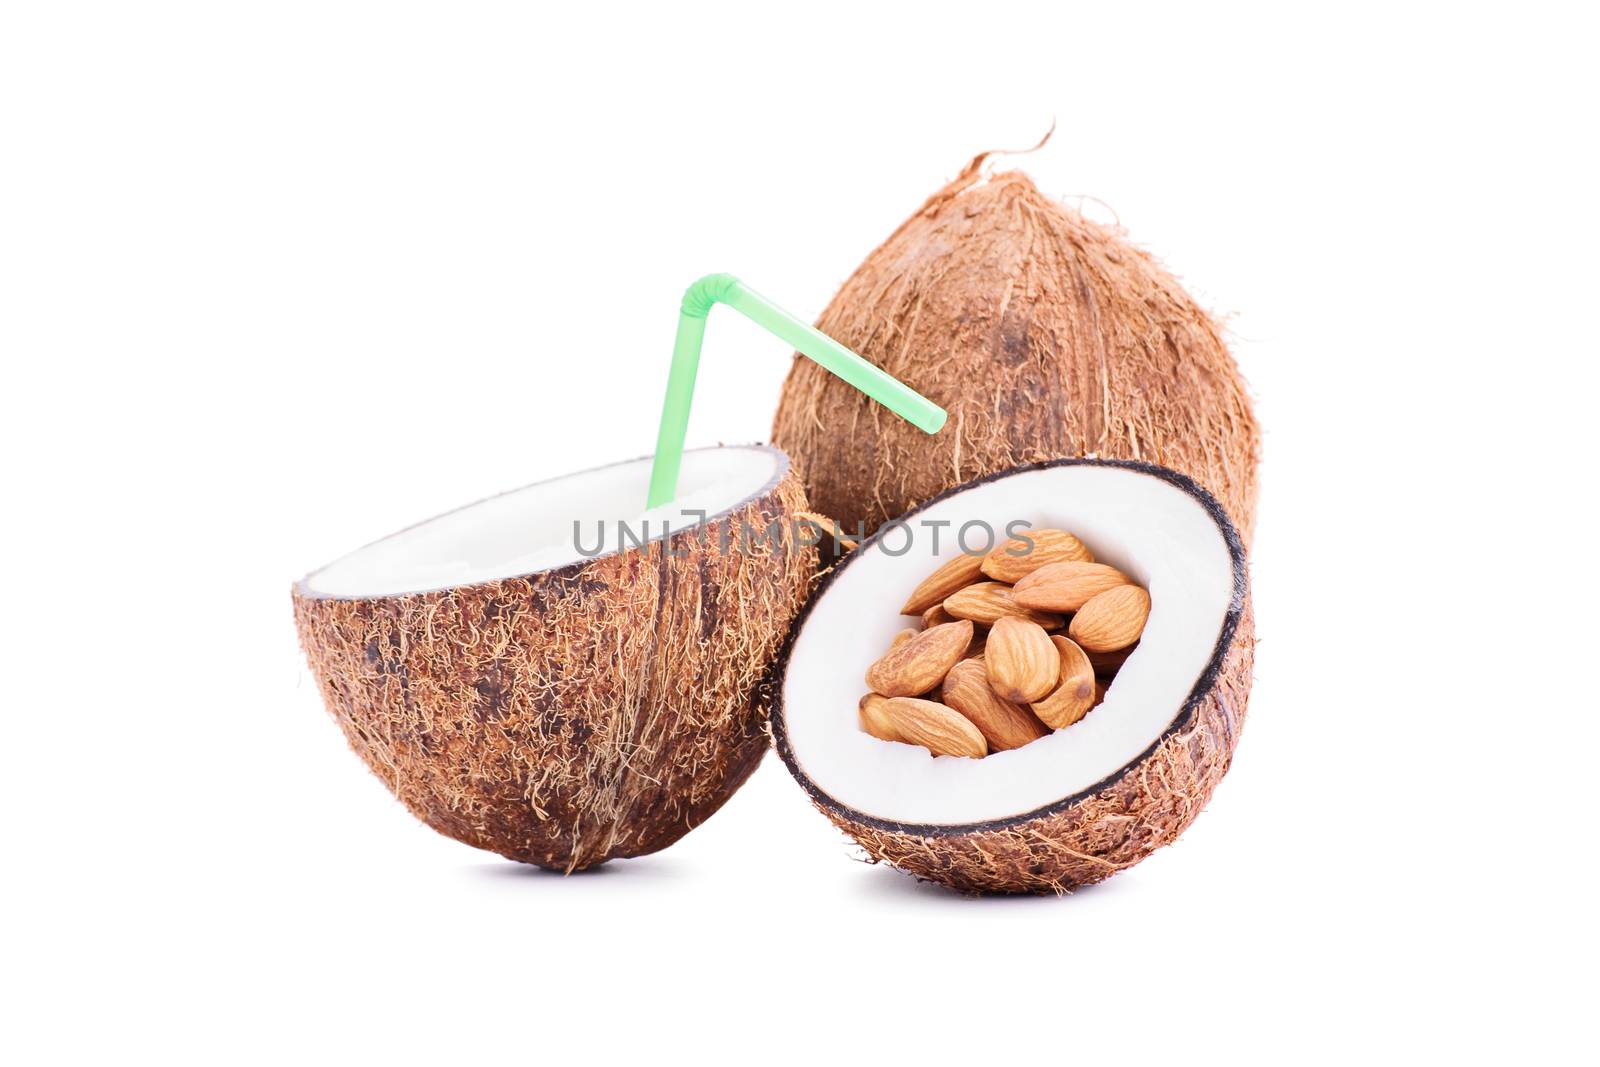 Almonds, coconut milk and coconuts by Mendelex